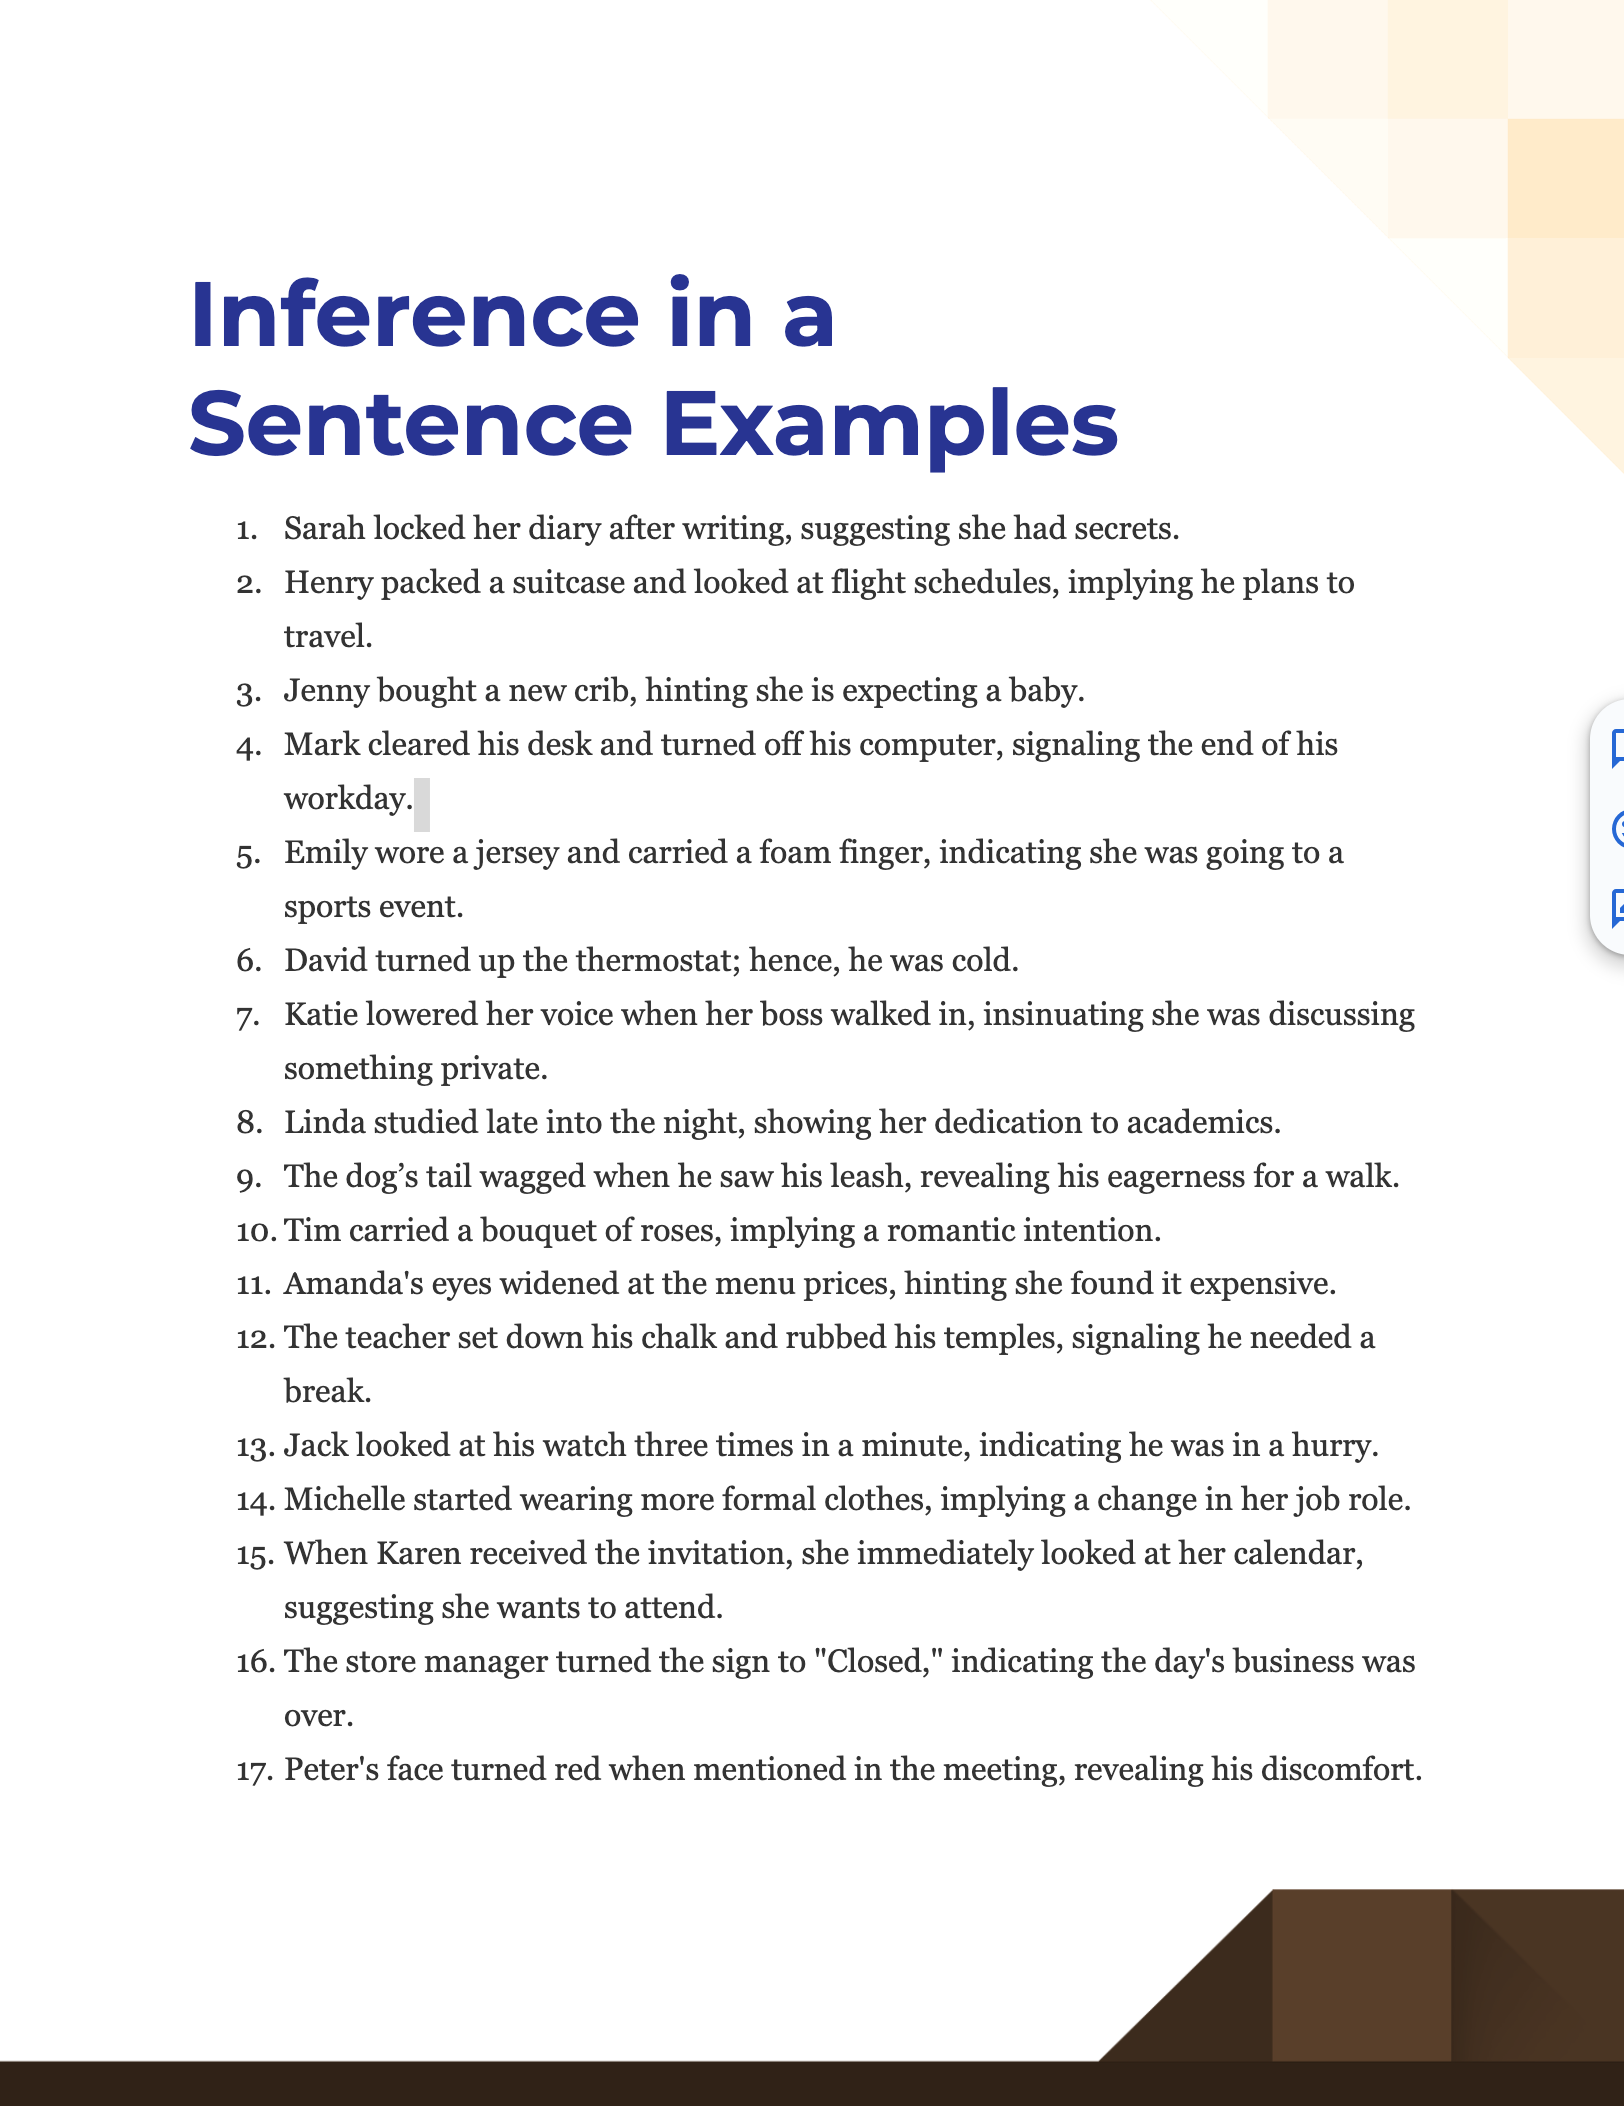 inference in a sentence